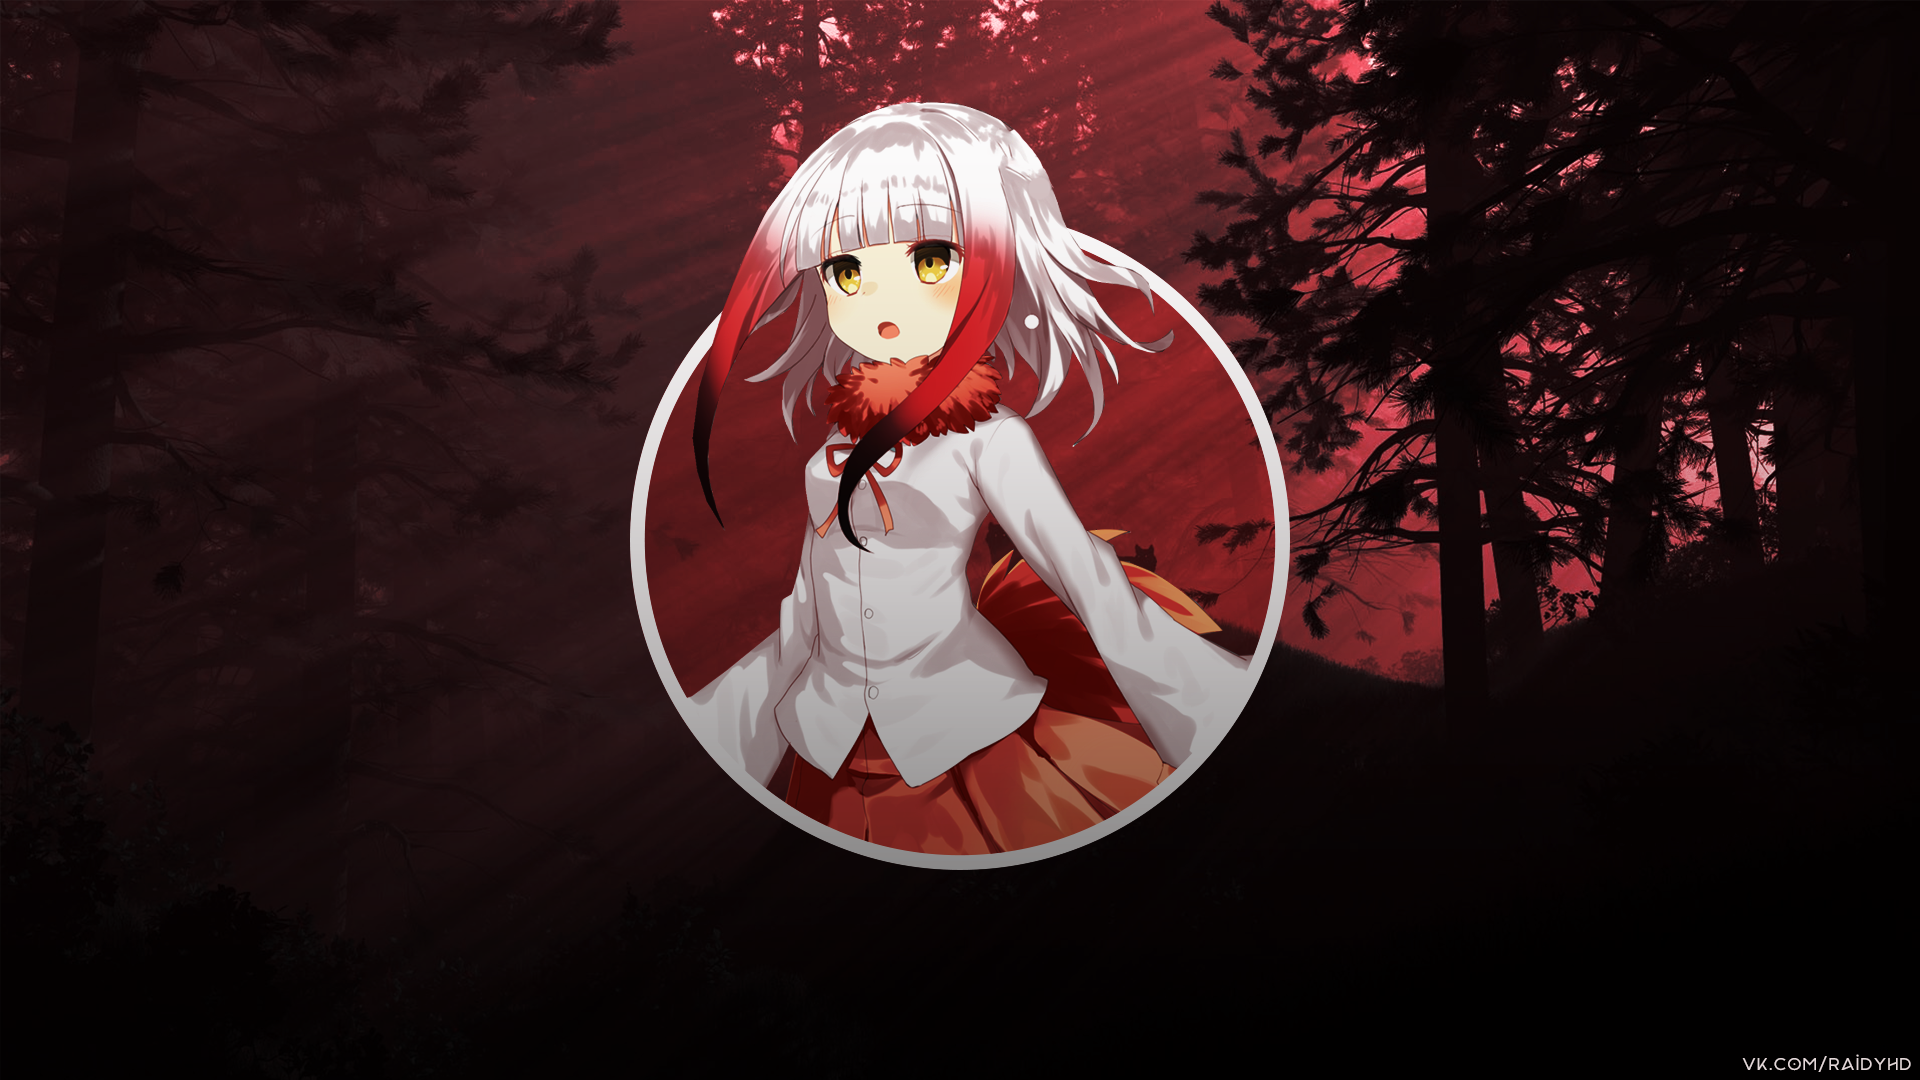 Anime 1920x1080 anime anime girls forest picture-in-picture Kemono Friends Scarlet Ibis (Kemono Friends) watermarked